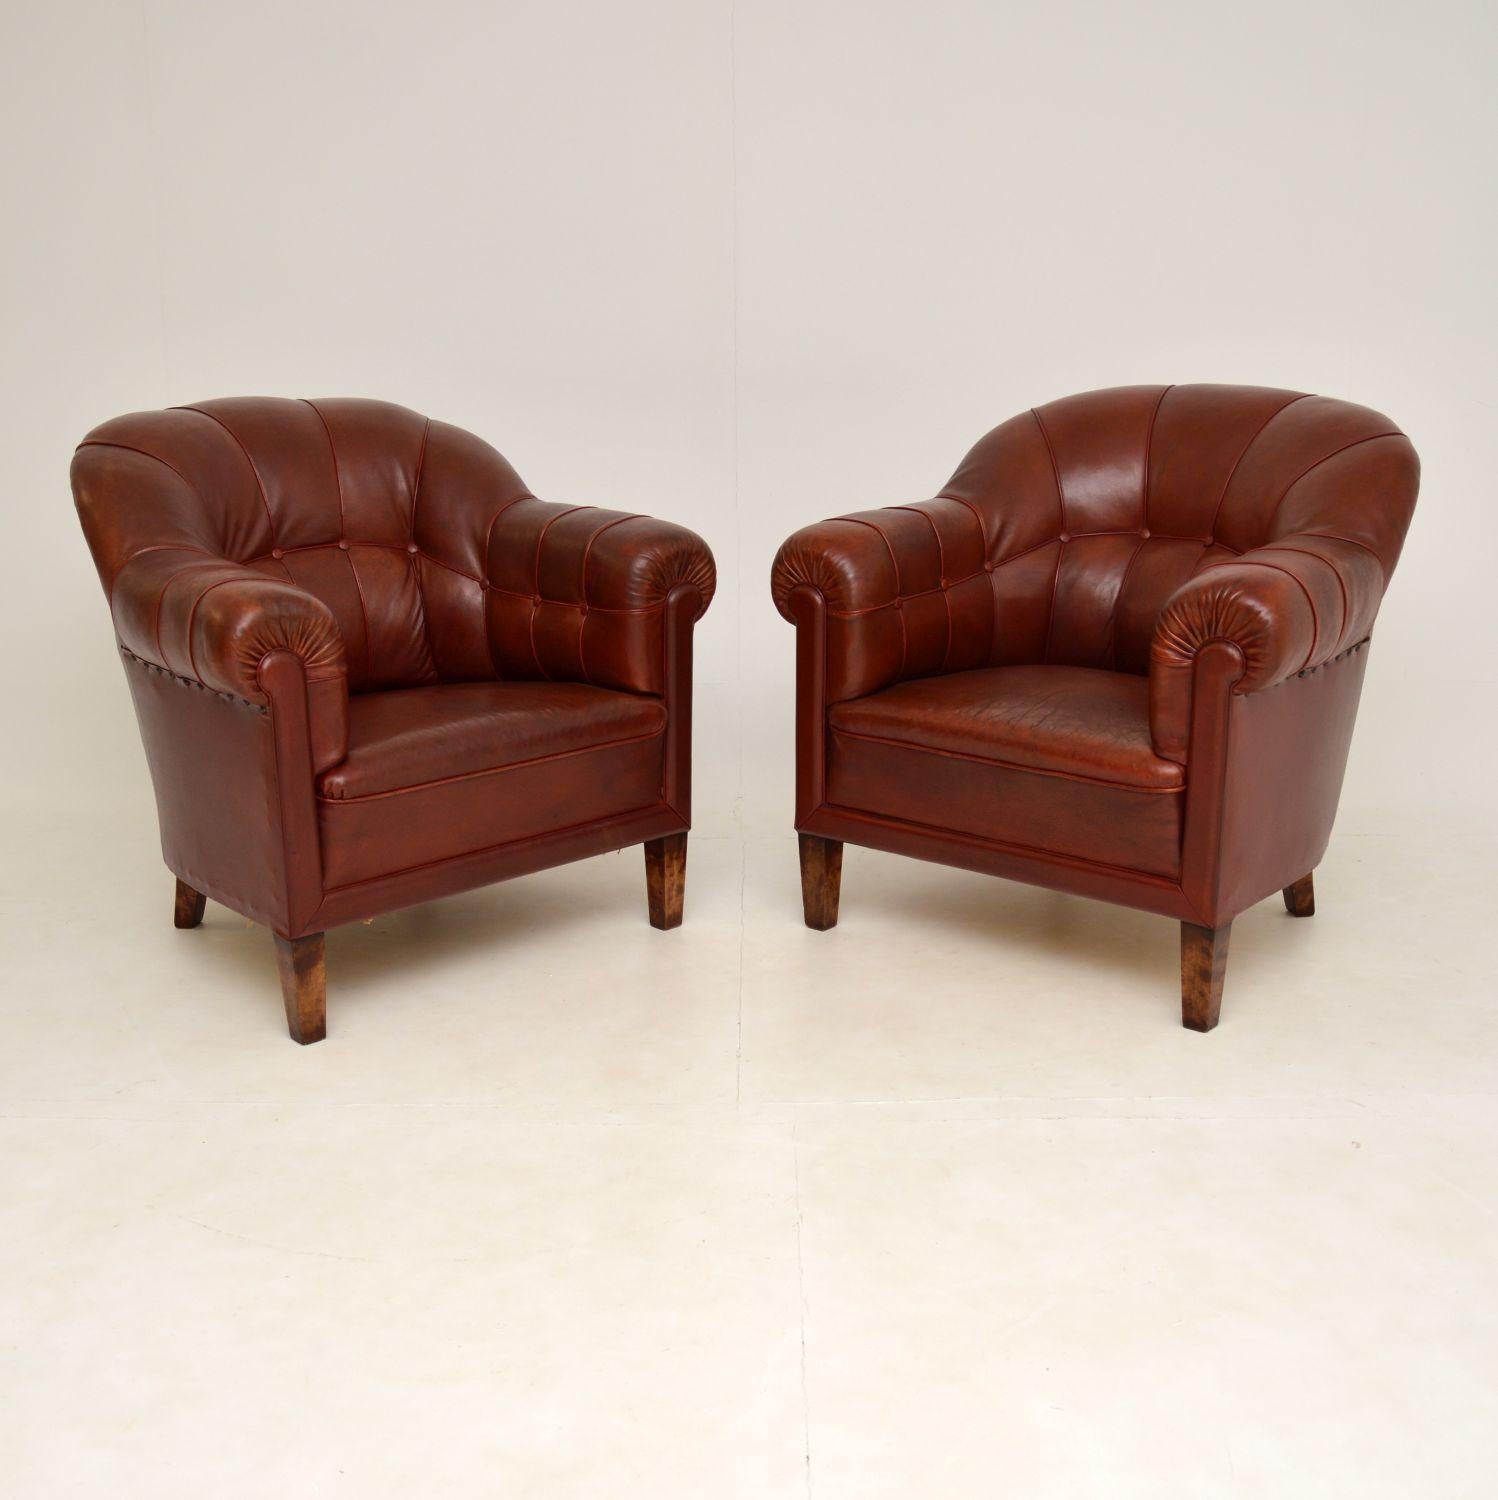 A stunning and extremely comfortable pair of antique leather club armchairs. These were made in Sweden, they date from the 1900-1910 period.

The quality is amazing, these are extremely well built and heavy. We have had the burgundy leather hand